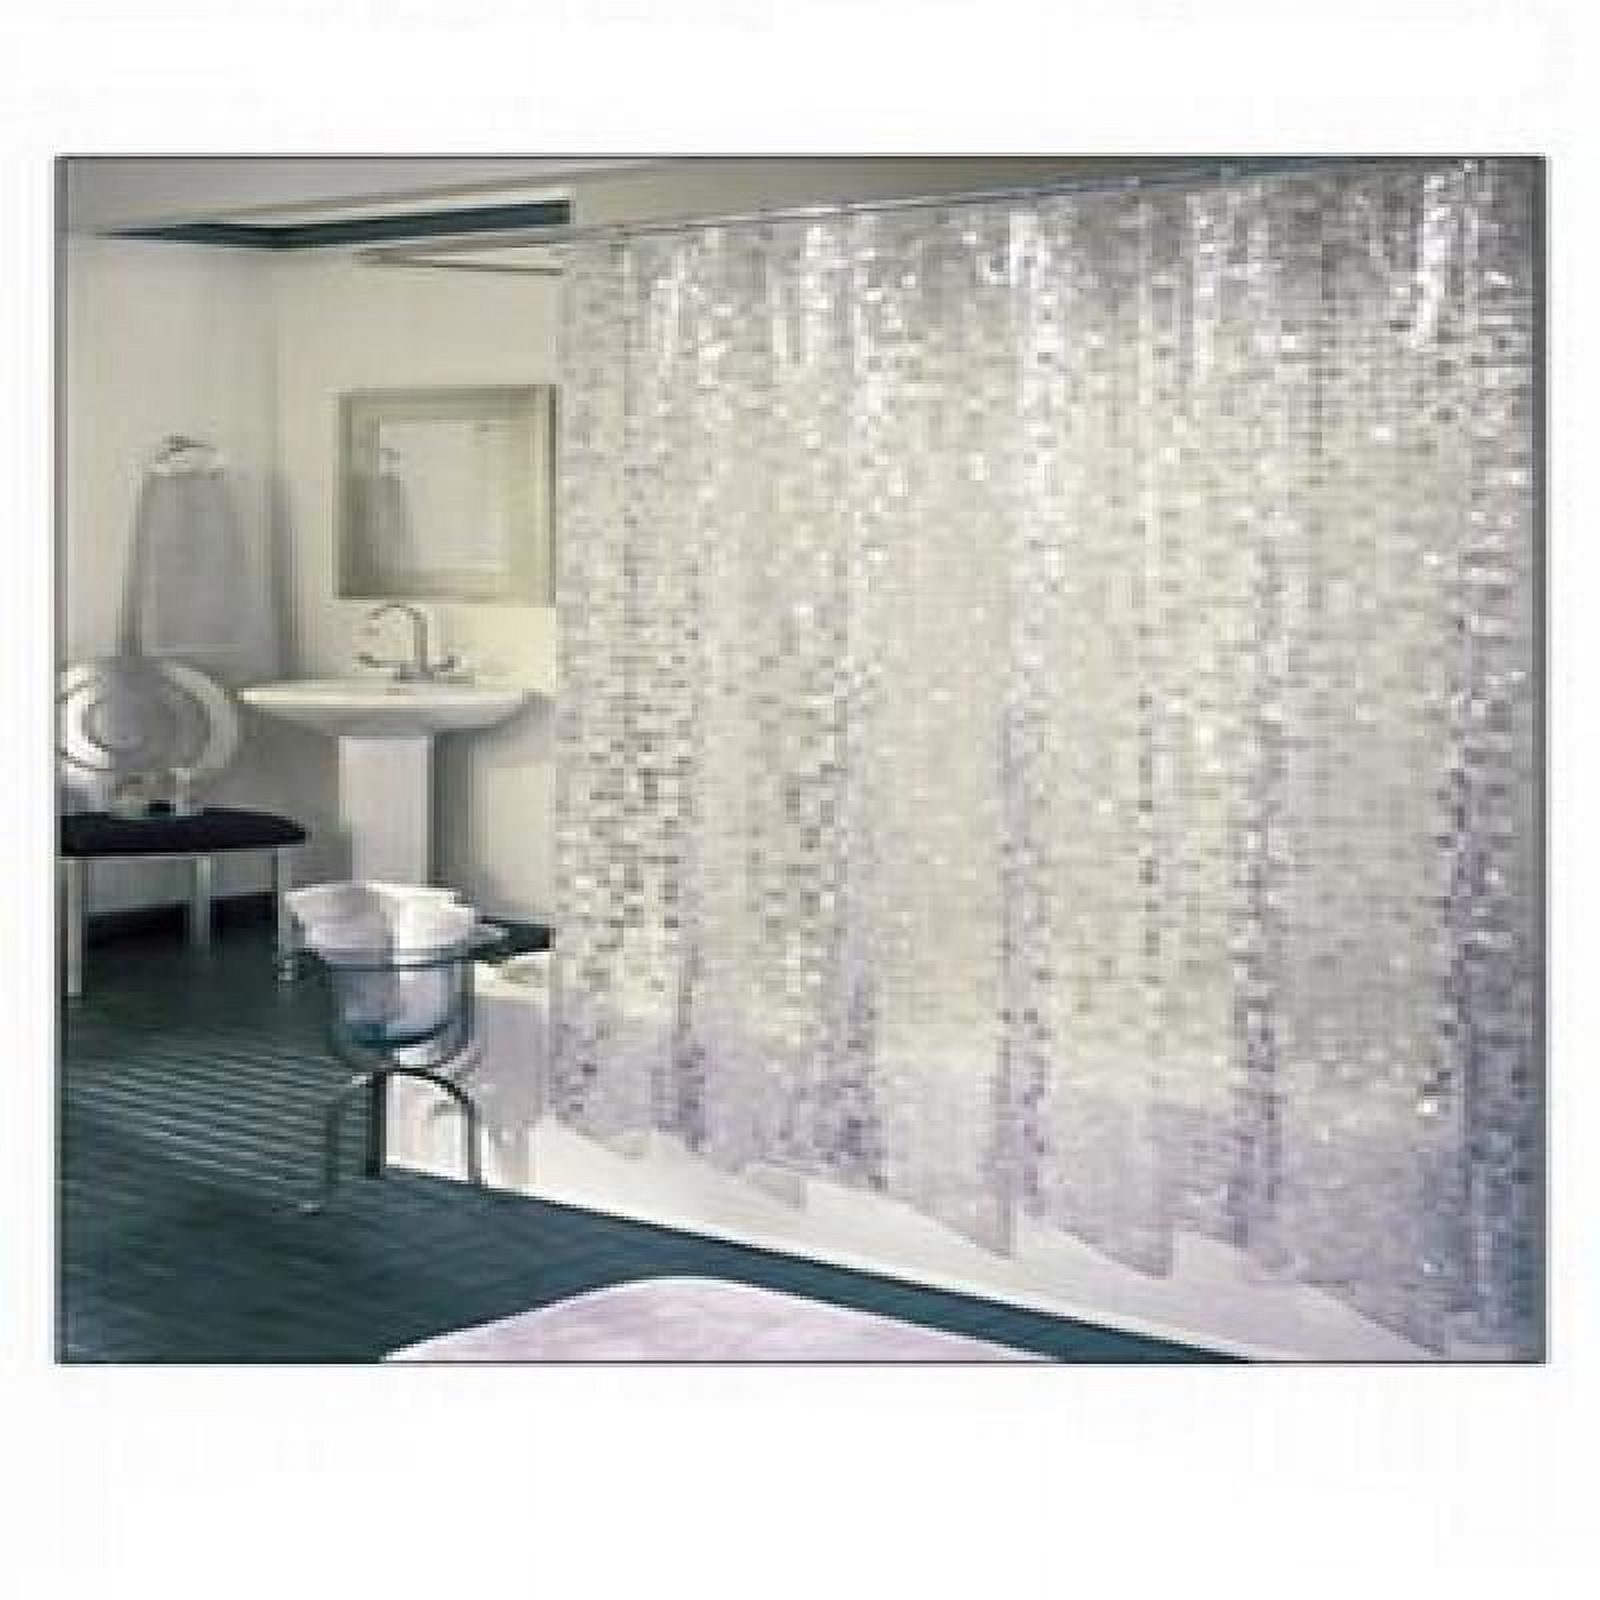 Excell Disco Vinyl Shower Curtain, Silver, 70x71 - image 2 of 3